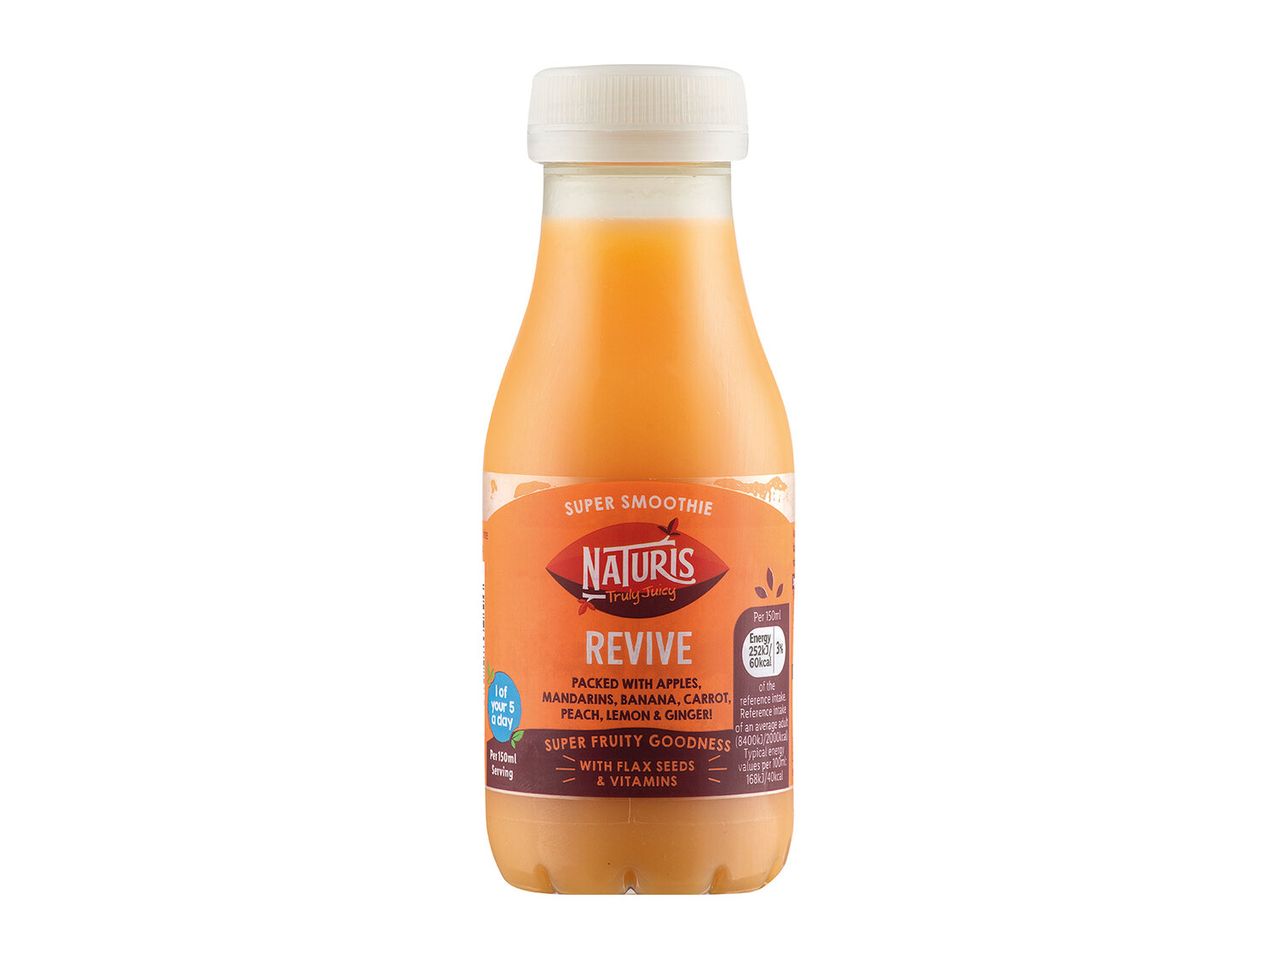 Go to full screen view: Naturis Super Smoothie Assorted Flavours 250ml Bottle - Image 3